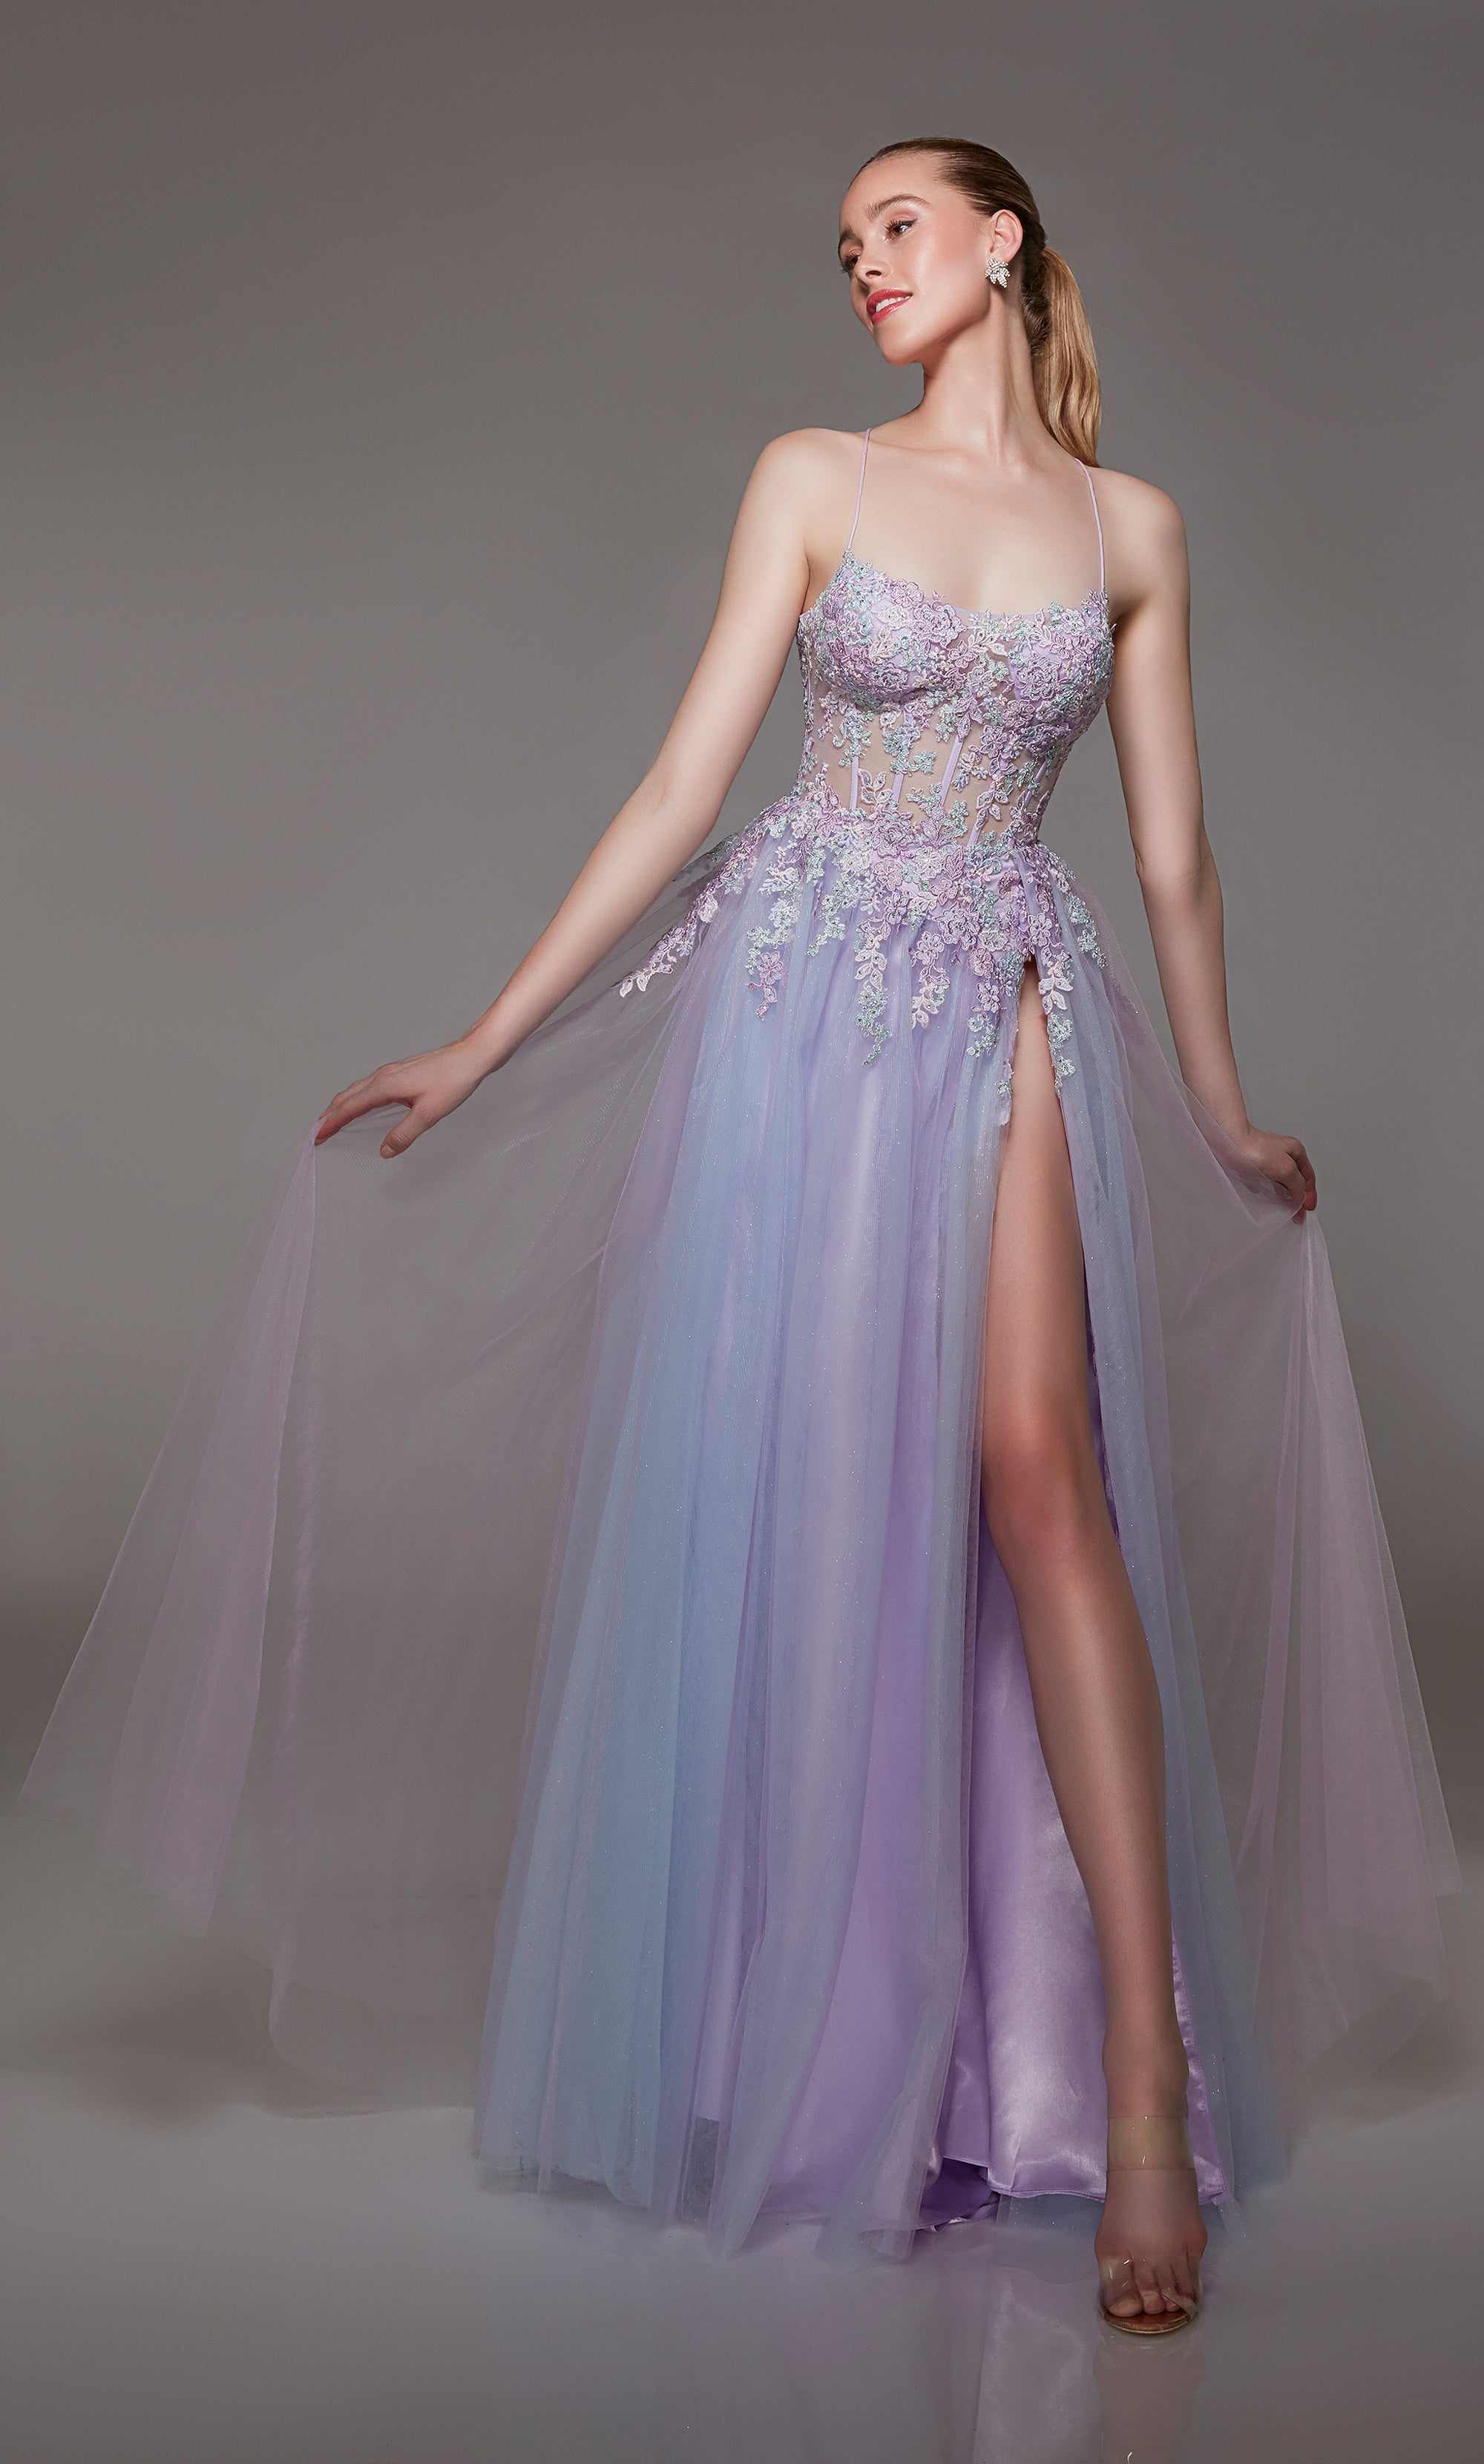 Tulle A-line corset prom dress in purple-pink: Sheer floral lace bodice, high slit, crisscross lace-up back, and an graceful train for an captivating look.